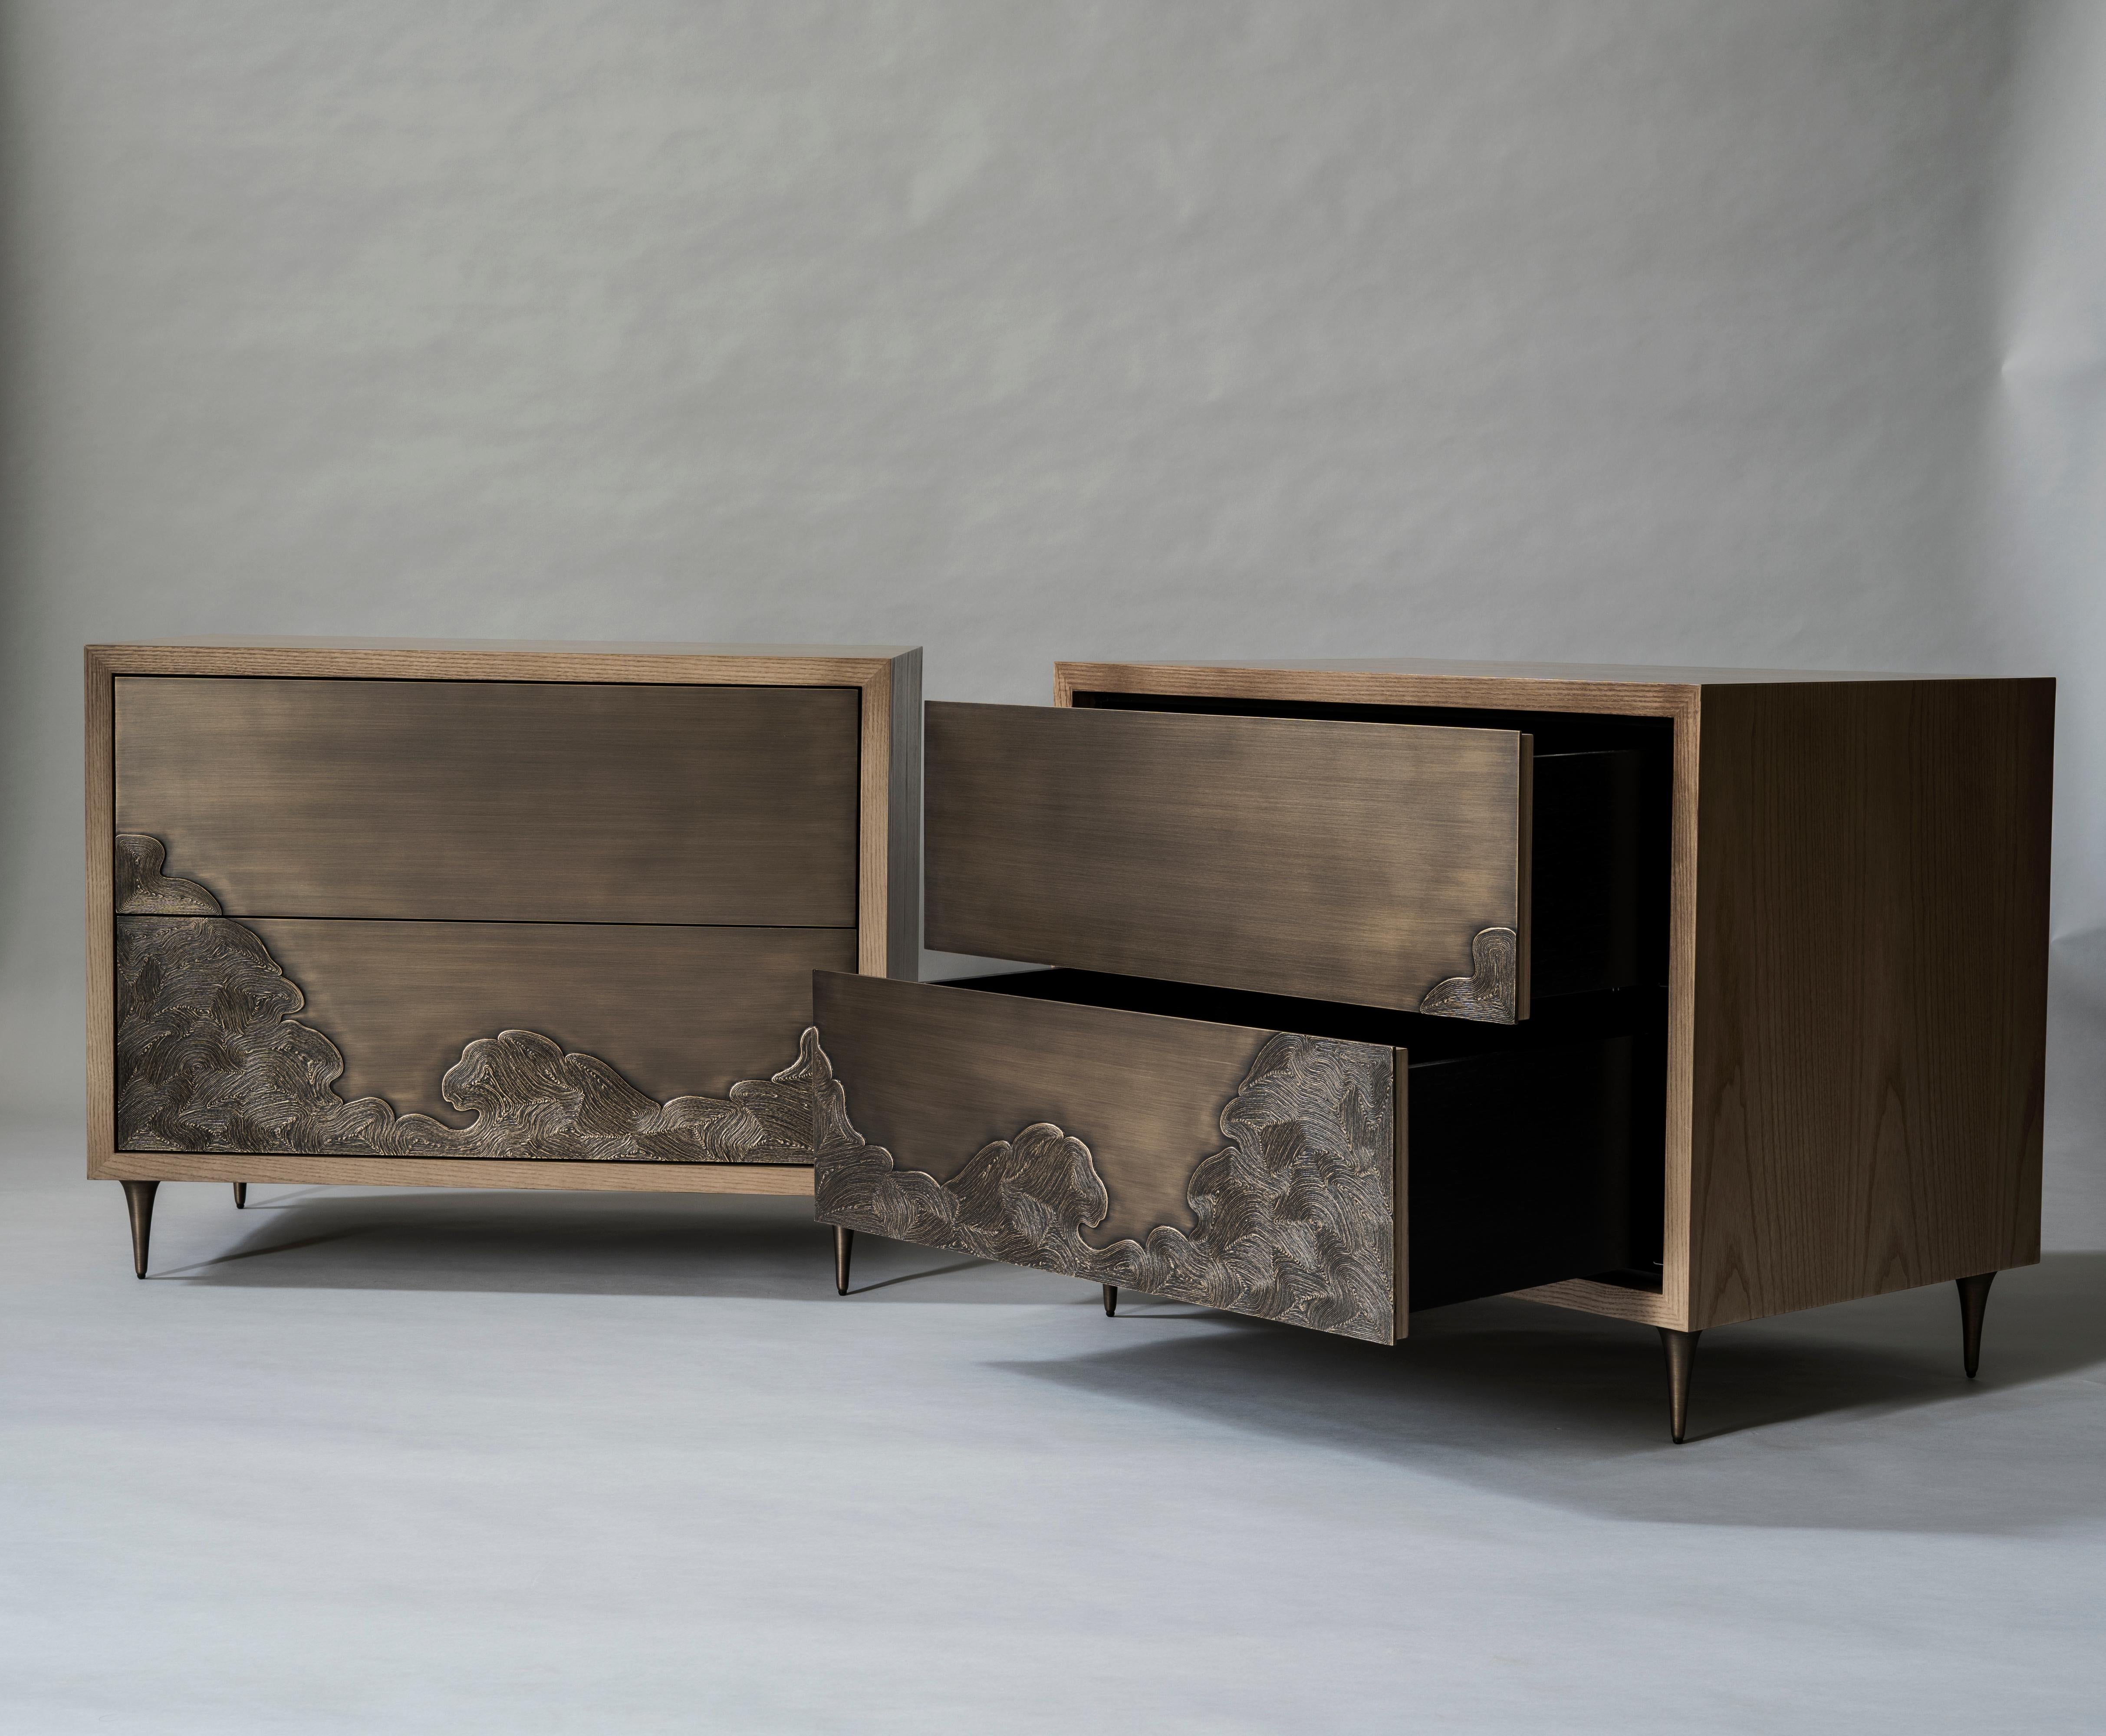 Indian Nami Bedside Table by DeMuro Das with Hand-Cast Solid Antique Bronze Drawers